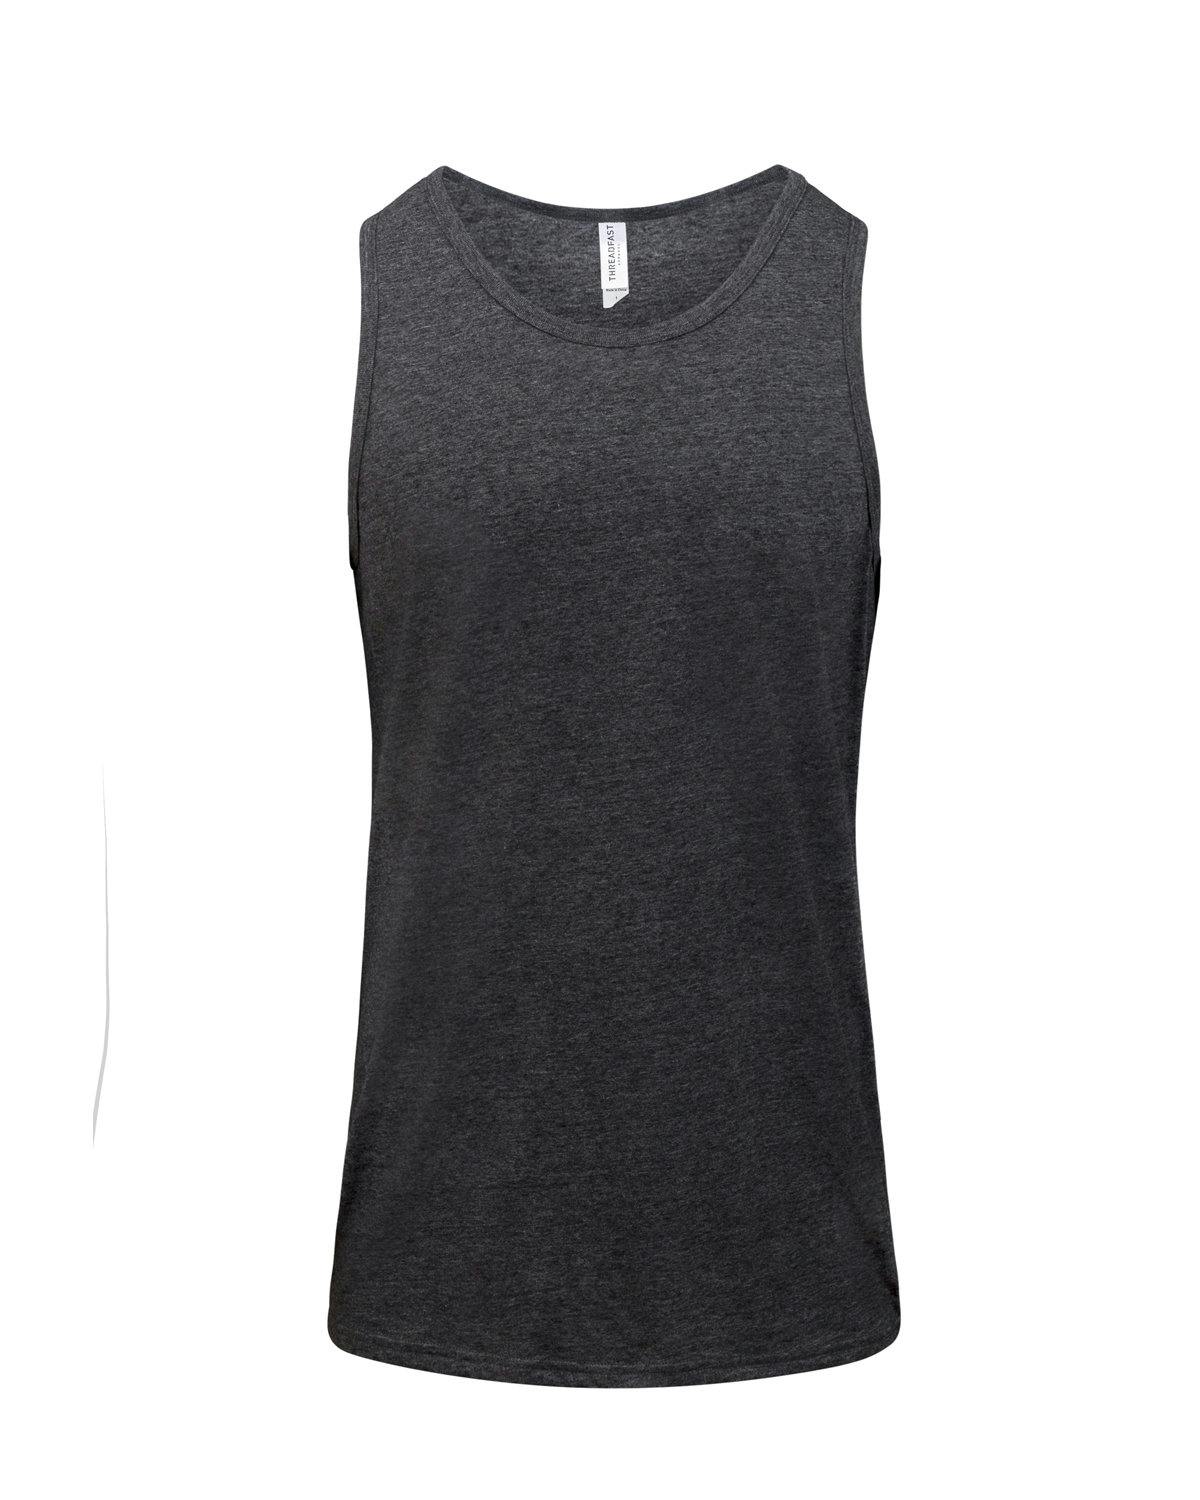 Image for Unisex Triblend Tank